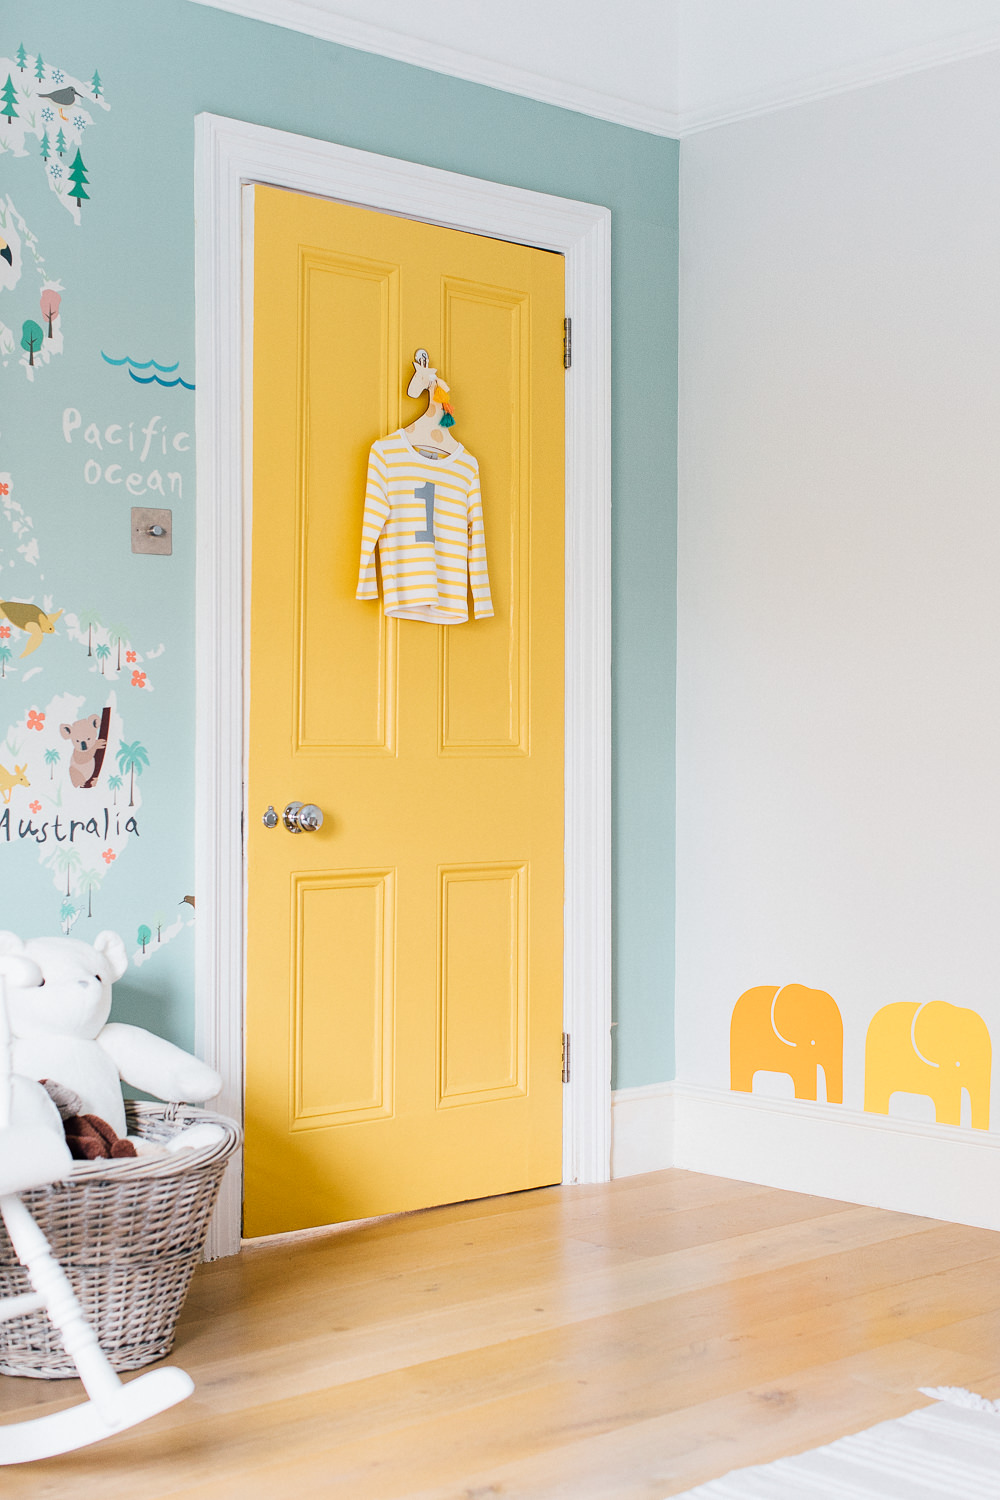 Statement door and elephant wall stickers